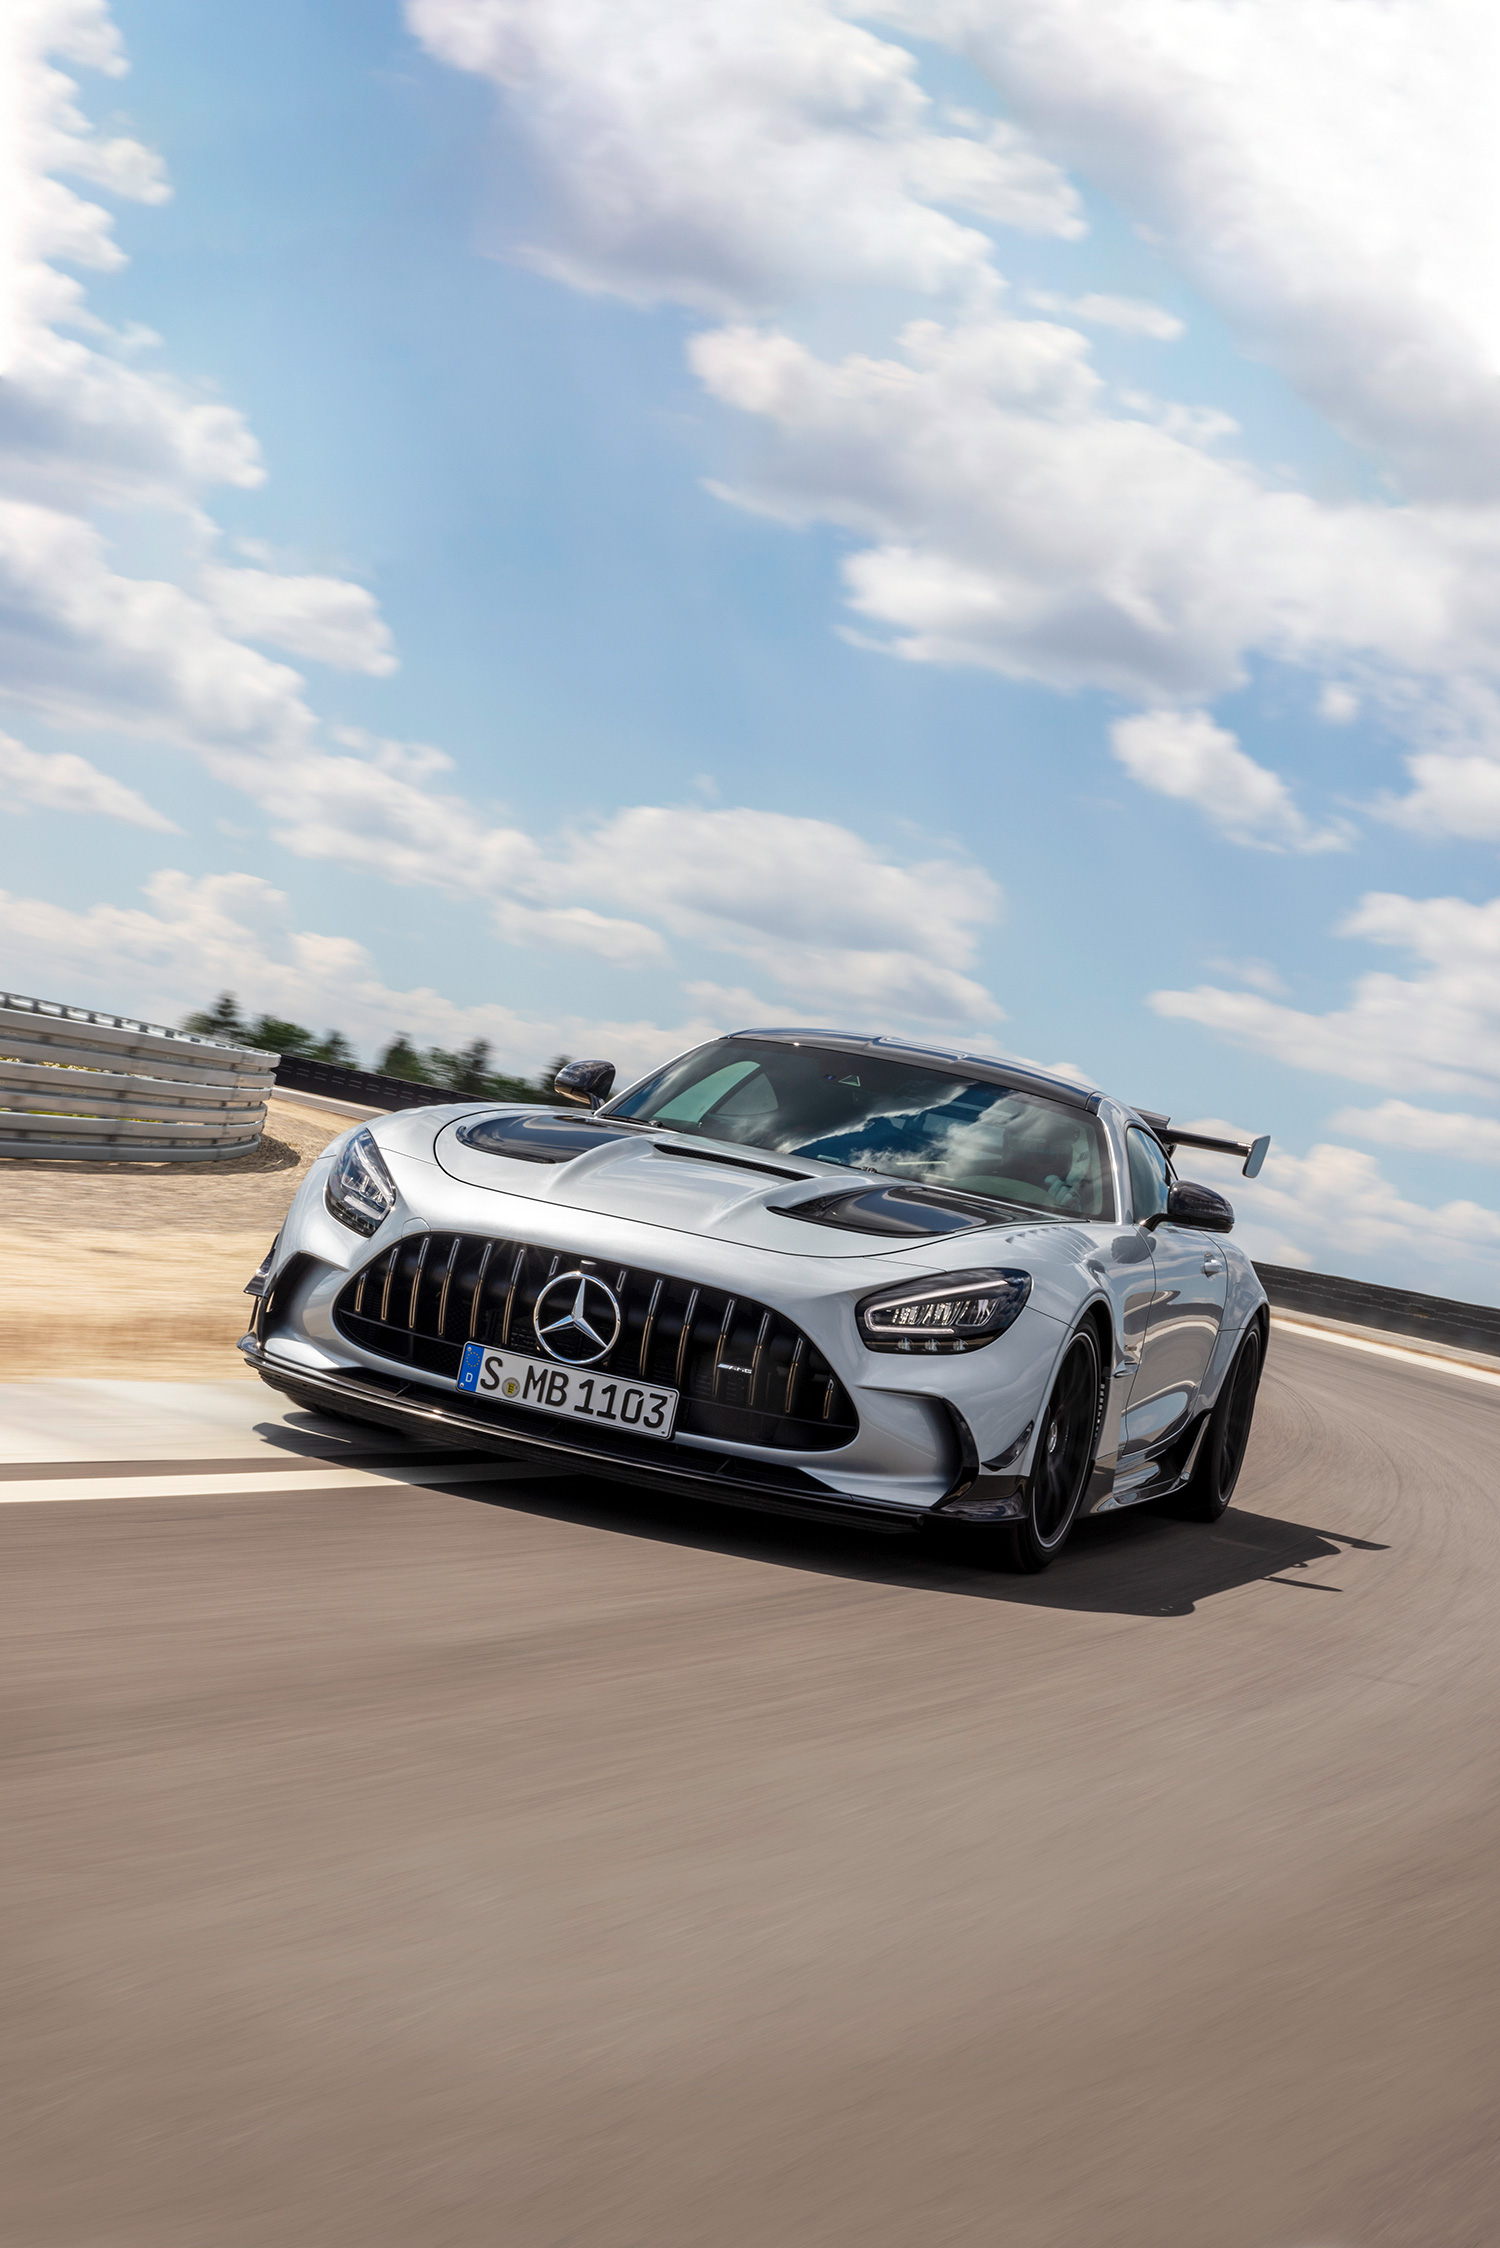 Gallery of the New Mercedes AMG GT Black Series 2021